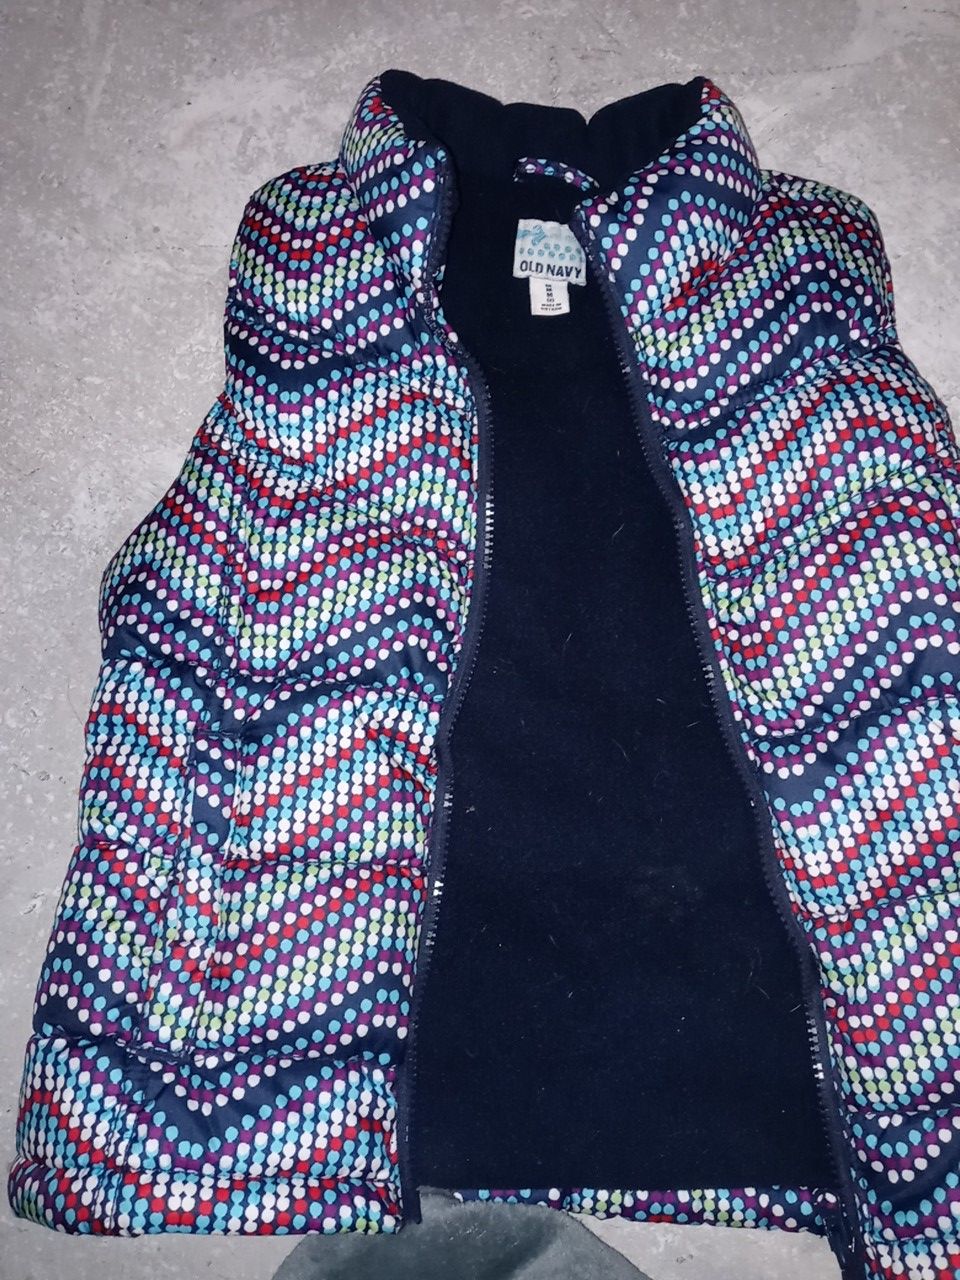 Size 8 girls Old Navy puffer vest for under the jacket